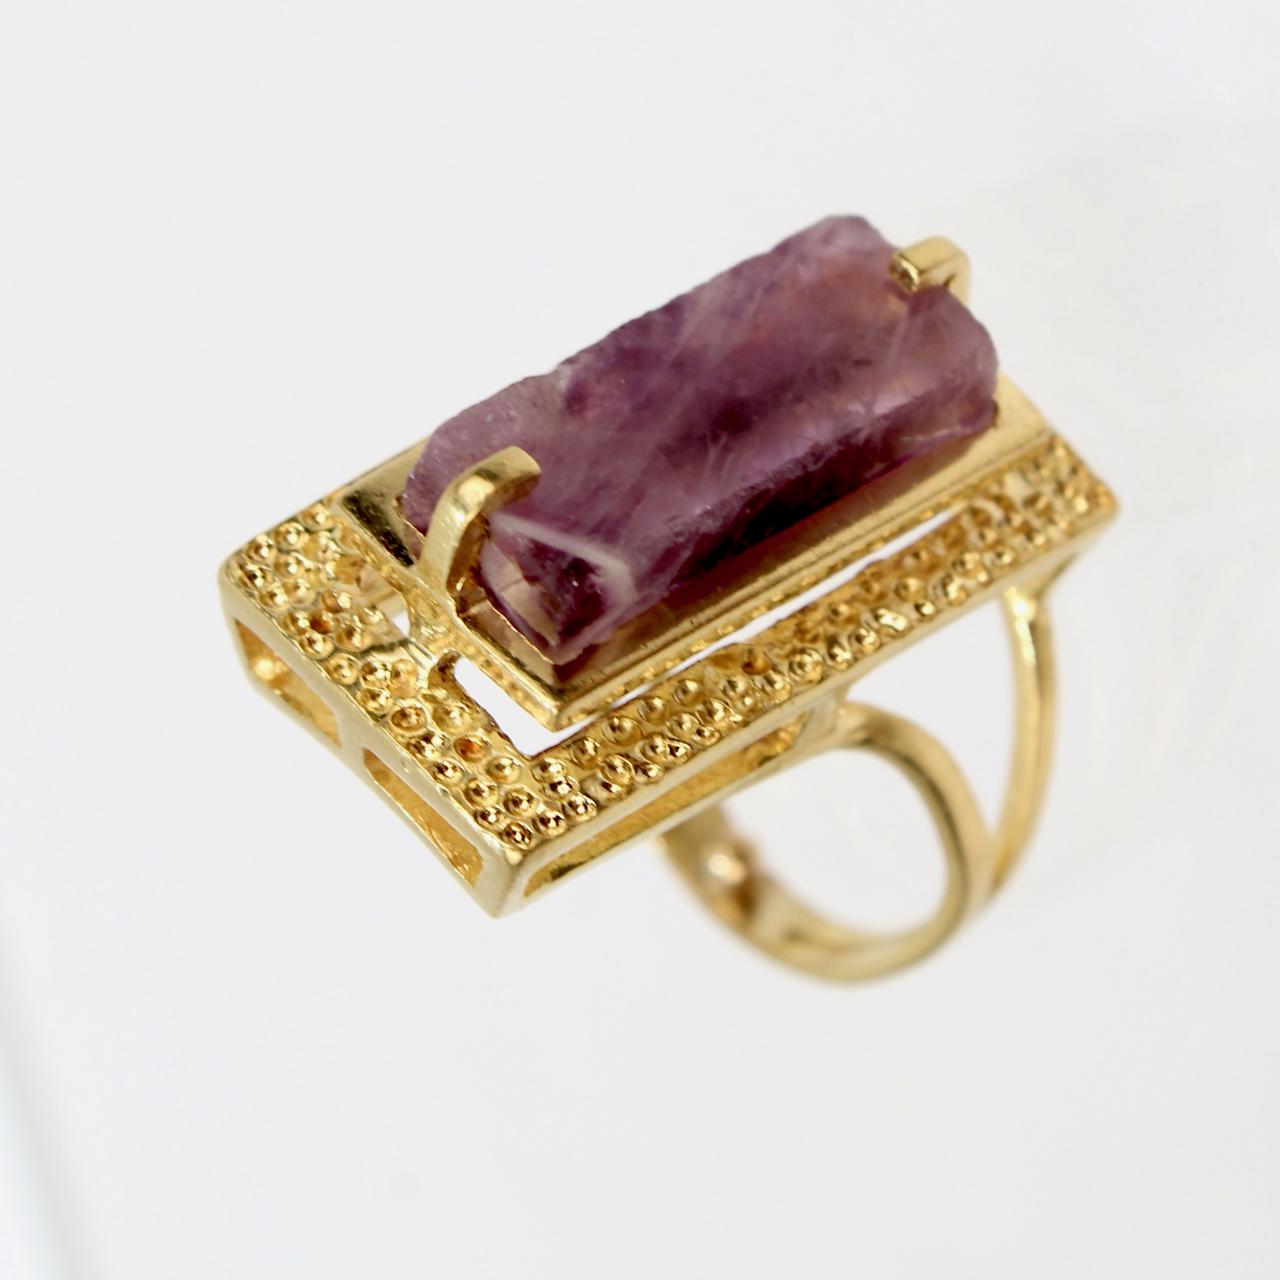 A very fine 18k gold and amethyst modernist cocktail ring.

With a rectangular cut amethyst gemstone prong set above a stippled and hammered platform setting that is supported by an asymmetrical split shank.

Very cool mid-century